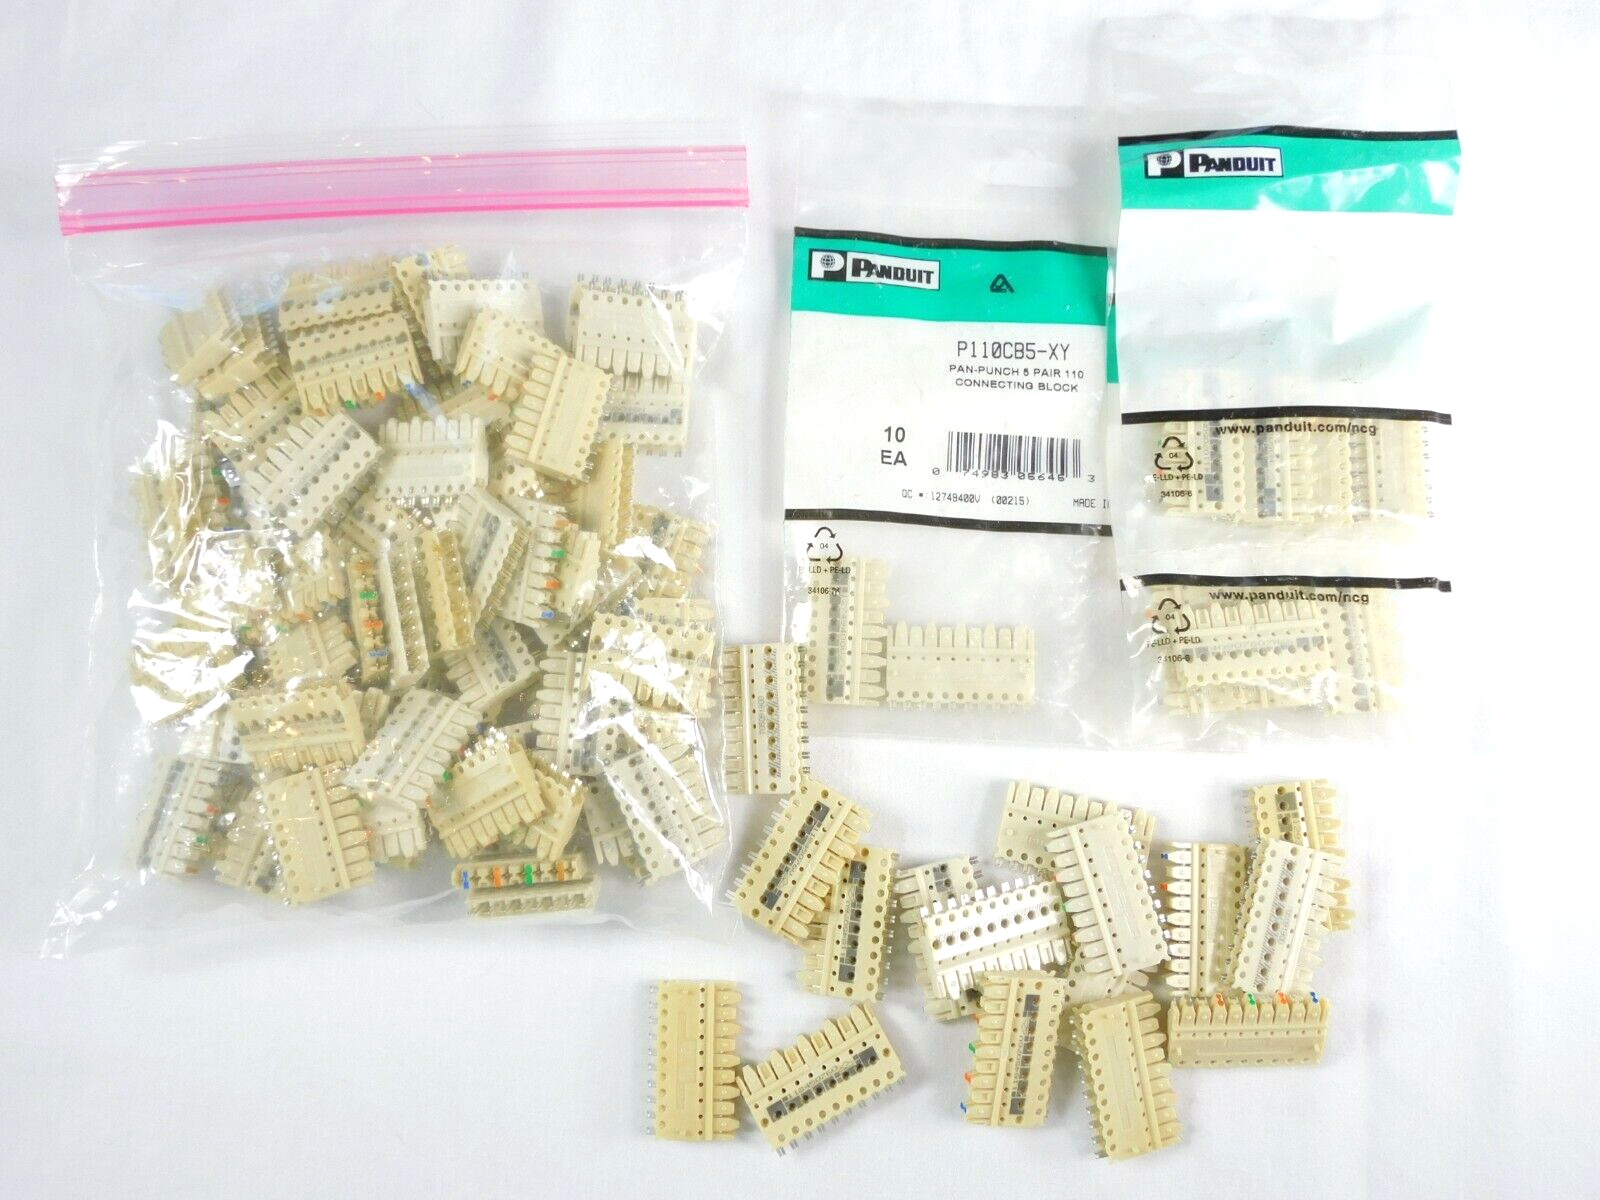 C4 and C5 Clips - Panduit, Siemon, Lucent All bagged separately - LOT OF 753